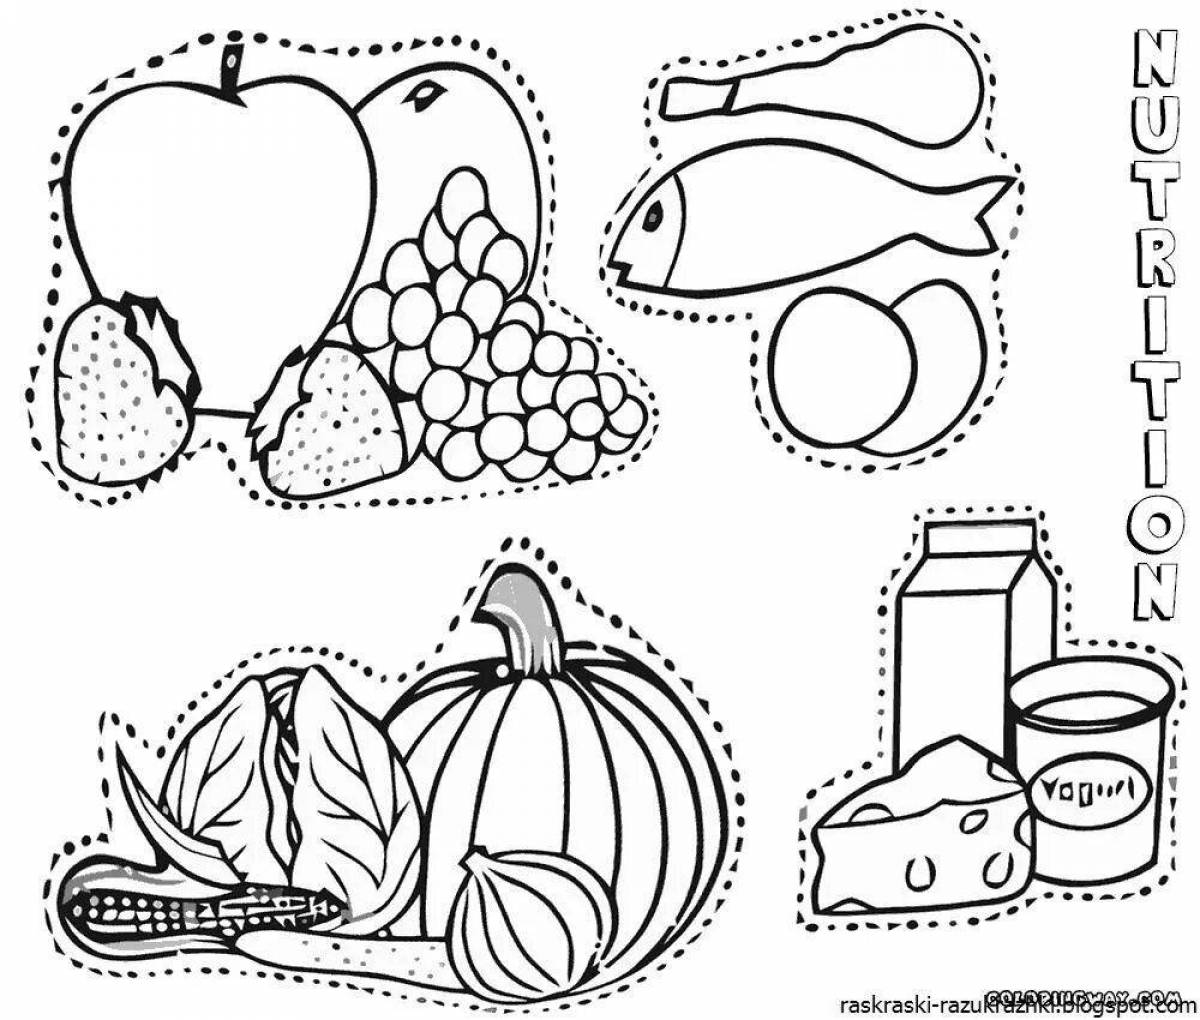 Useful healthy food coloring book for kids